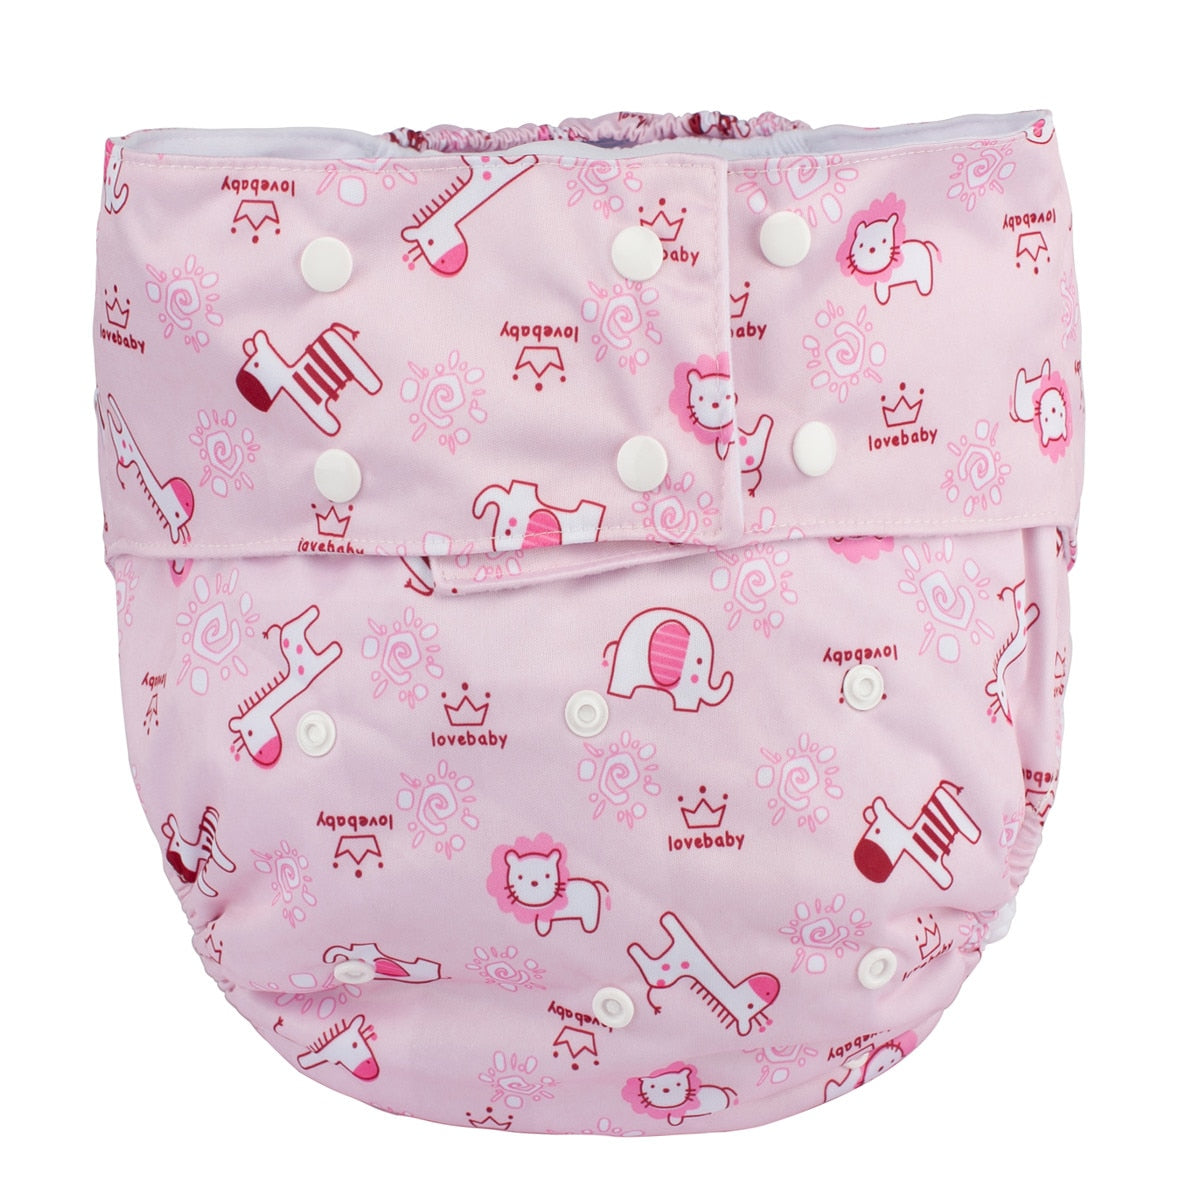 Reusable Adult Cloth Diaper/Nappy Pocket - Cloth Diapers - Twisted Jezebel